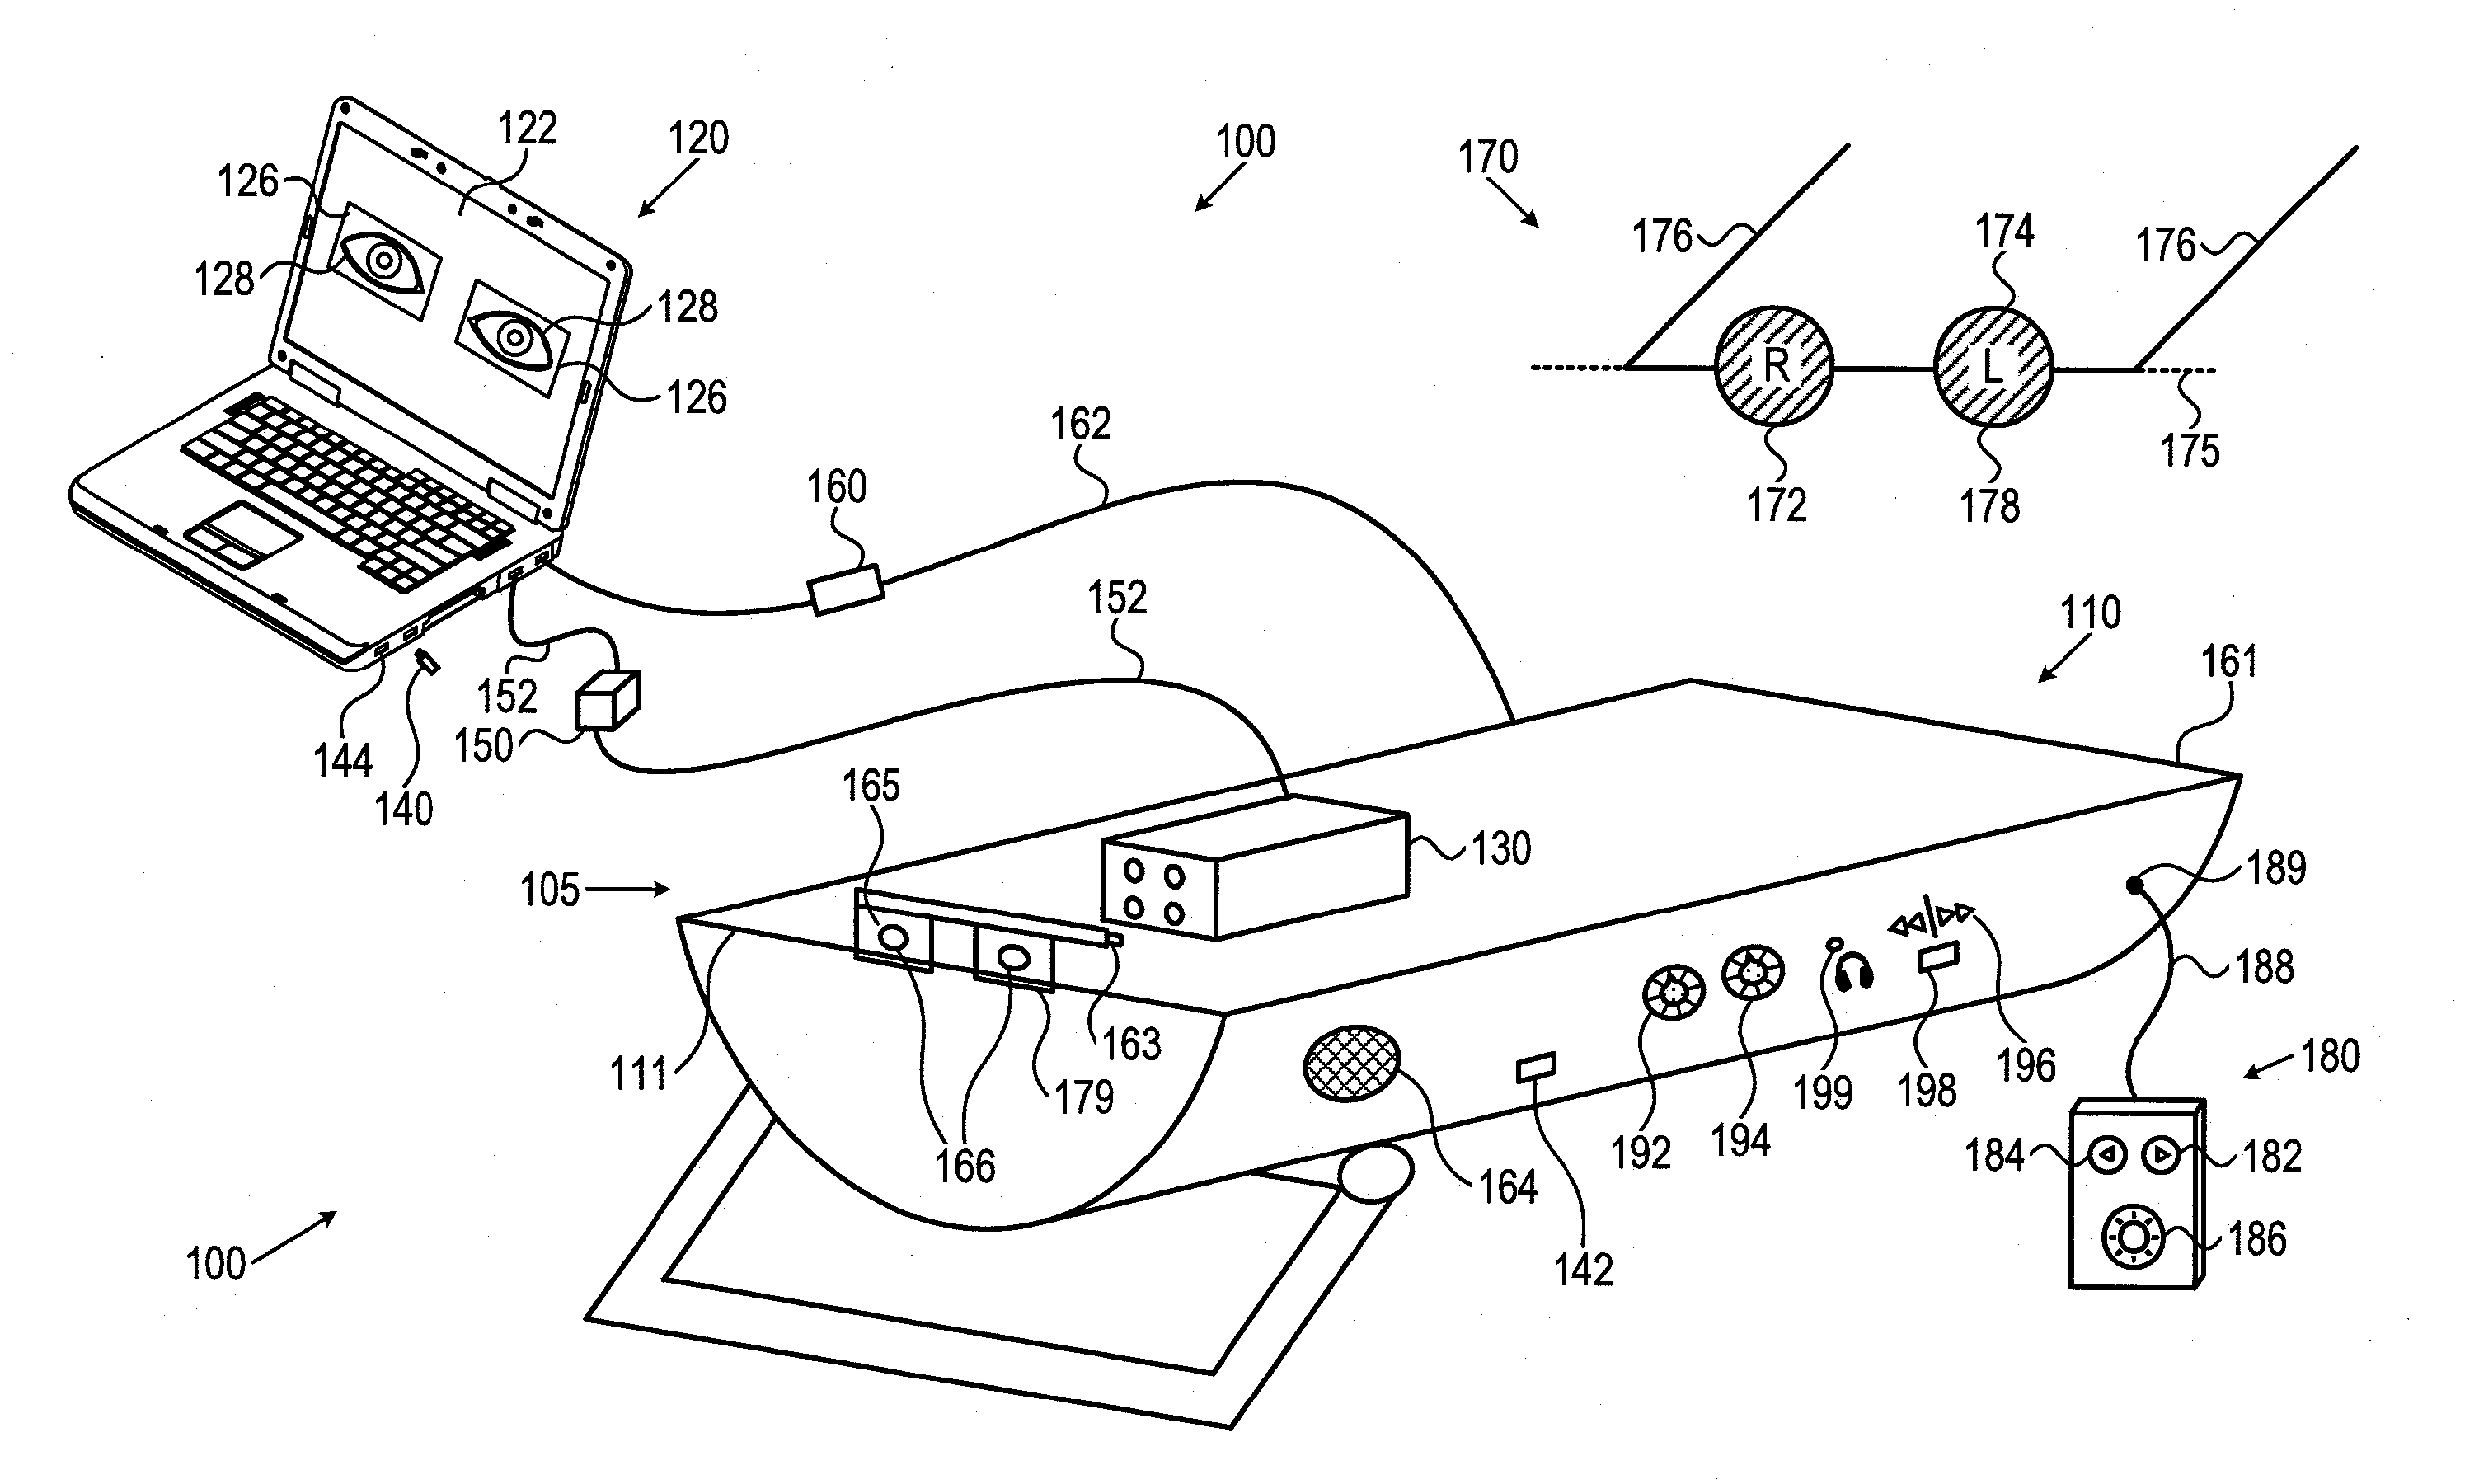 Audio-feedback computerized system and method for operator-controlled eye exercise